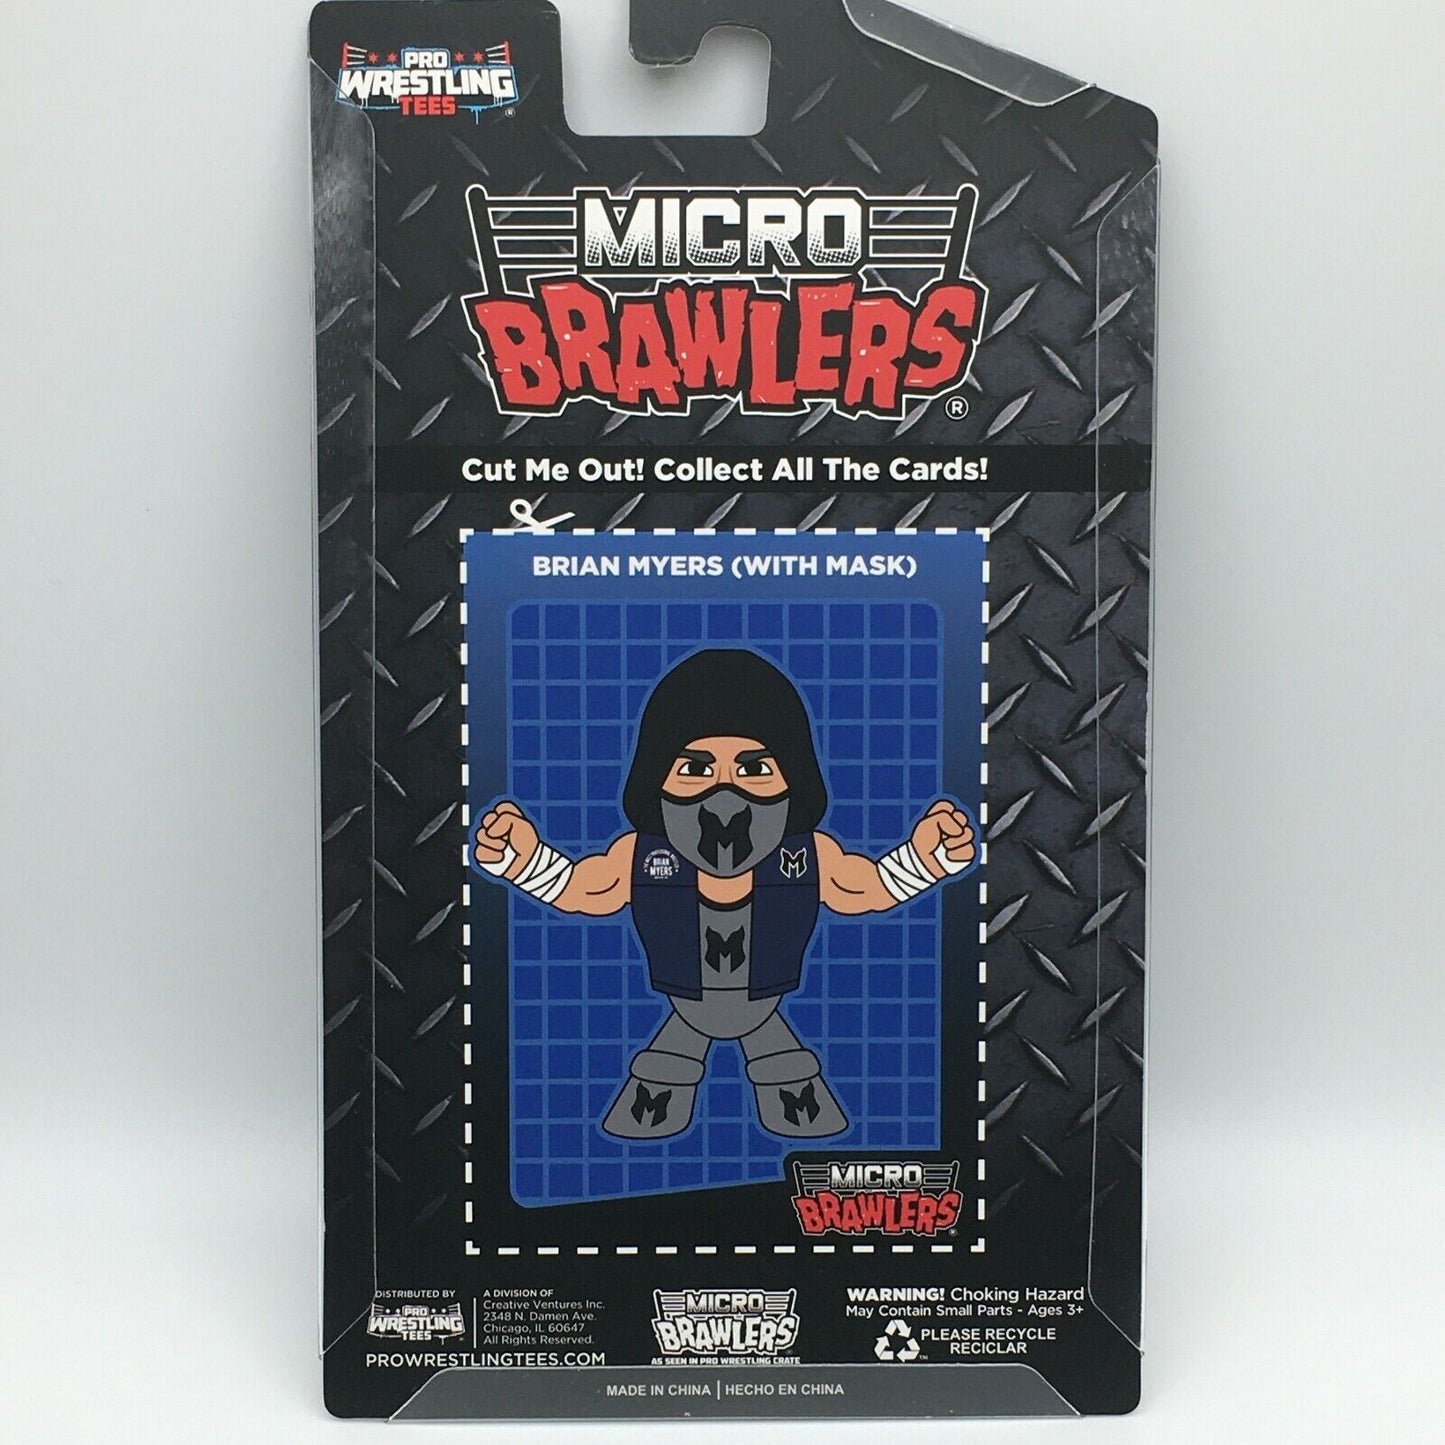 2021 Major Wrestling Figure Podcast Micro Brawlers Brian Myers [With Mask]